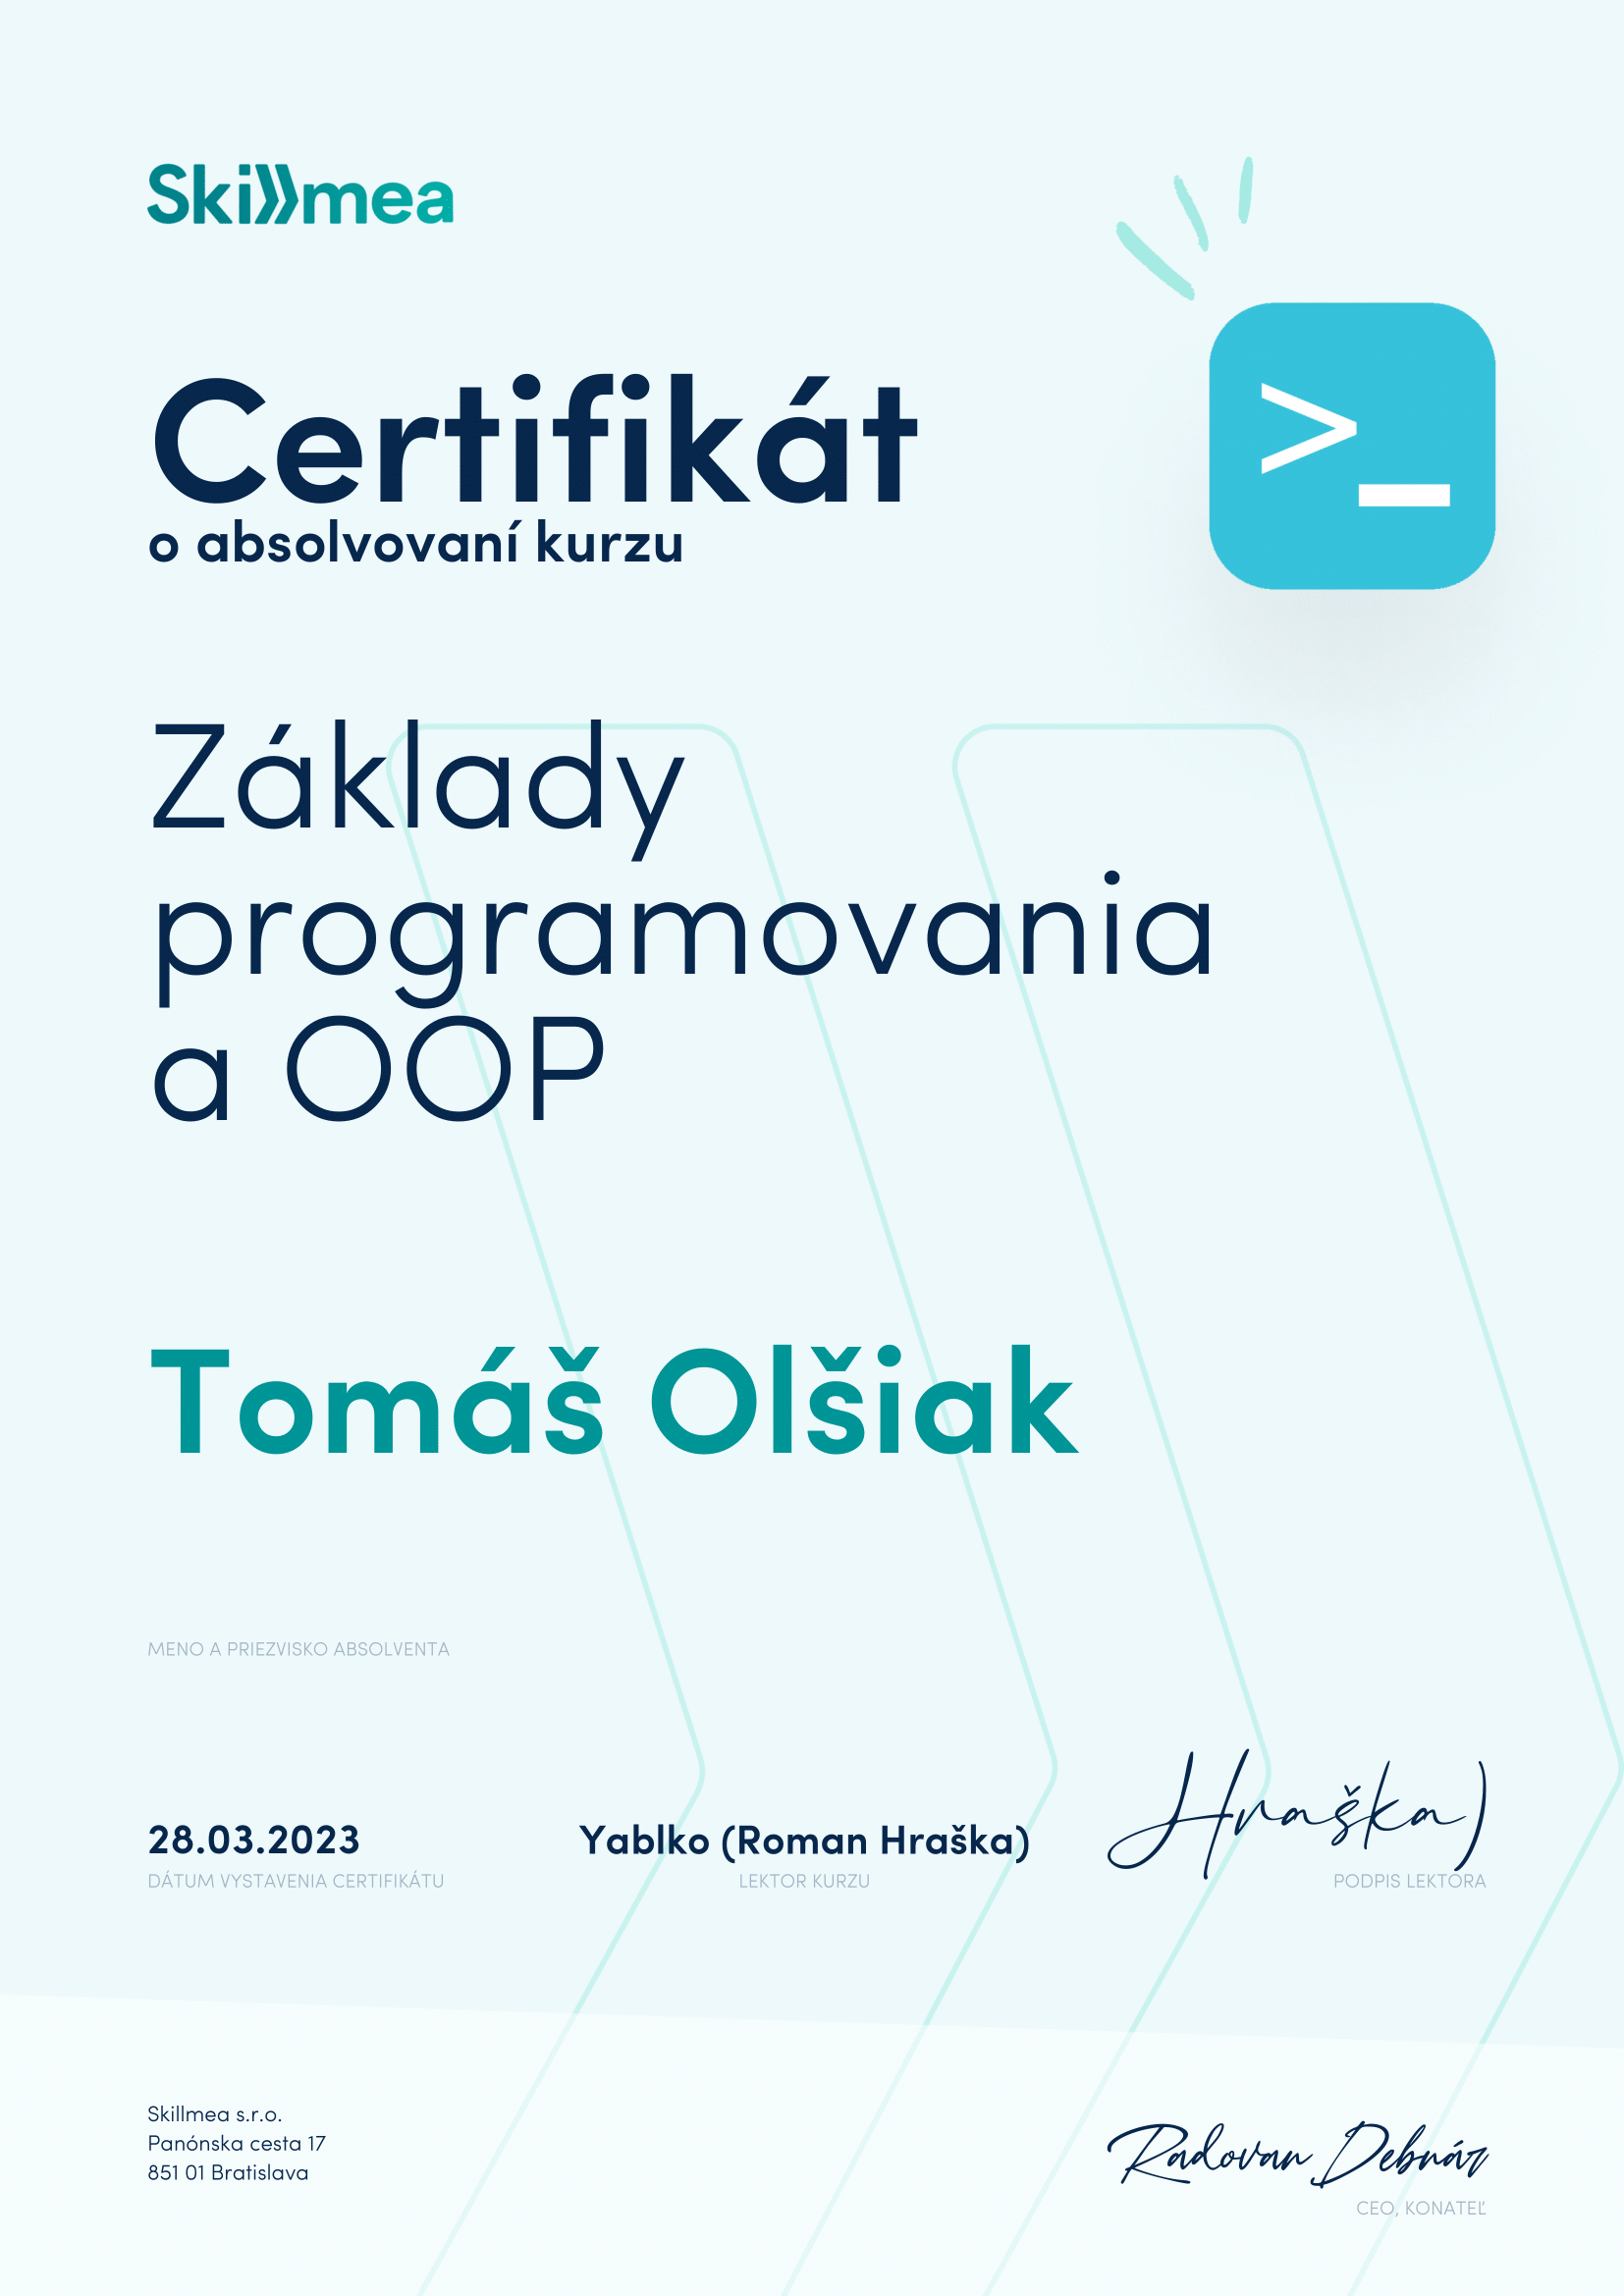 photo of my certificate for Fundamentals of Programming and OOP